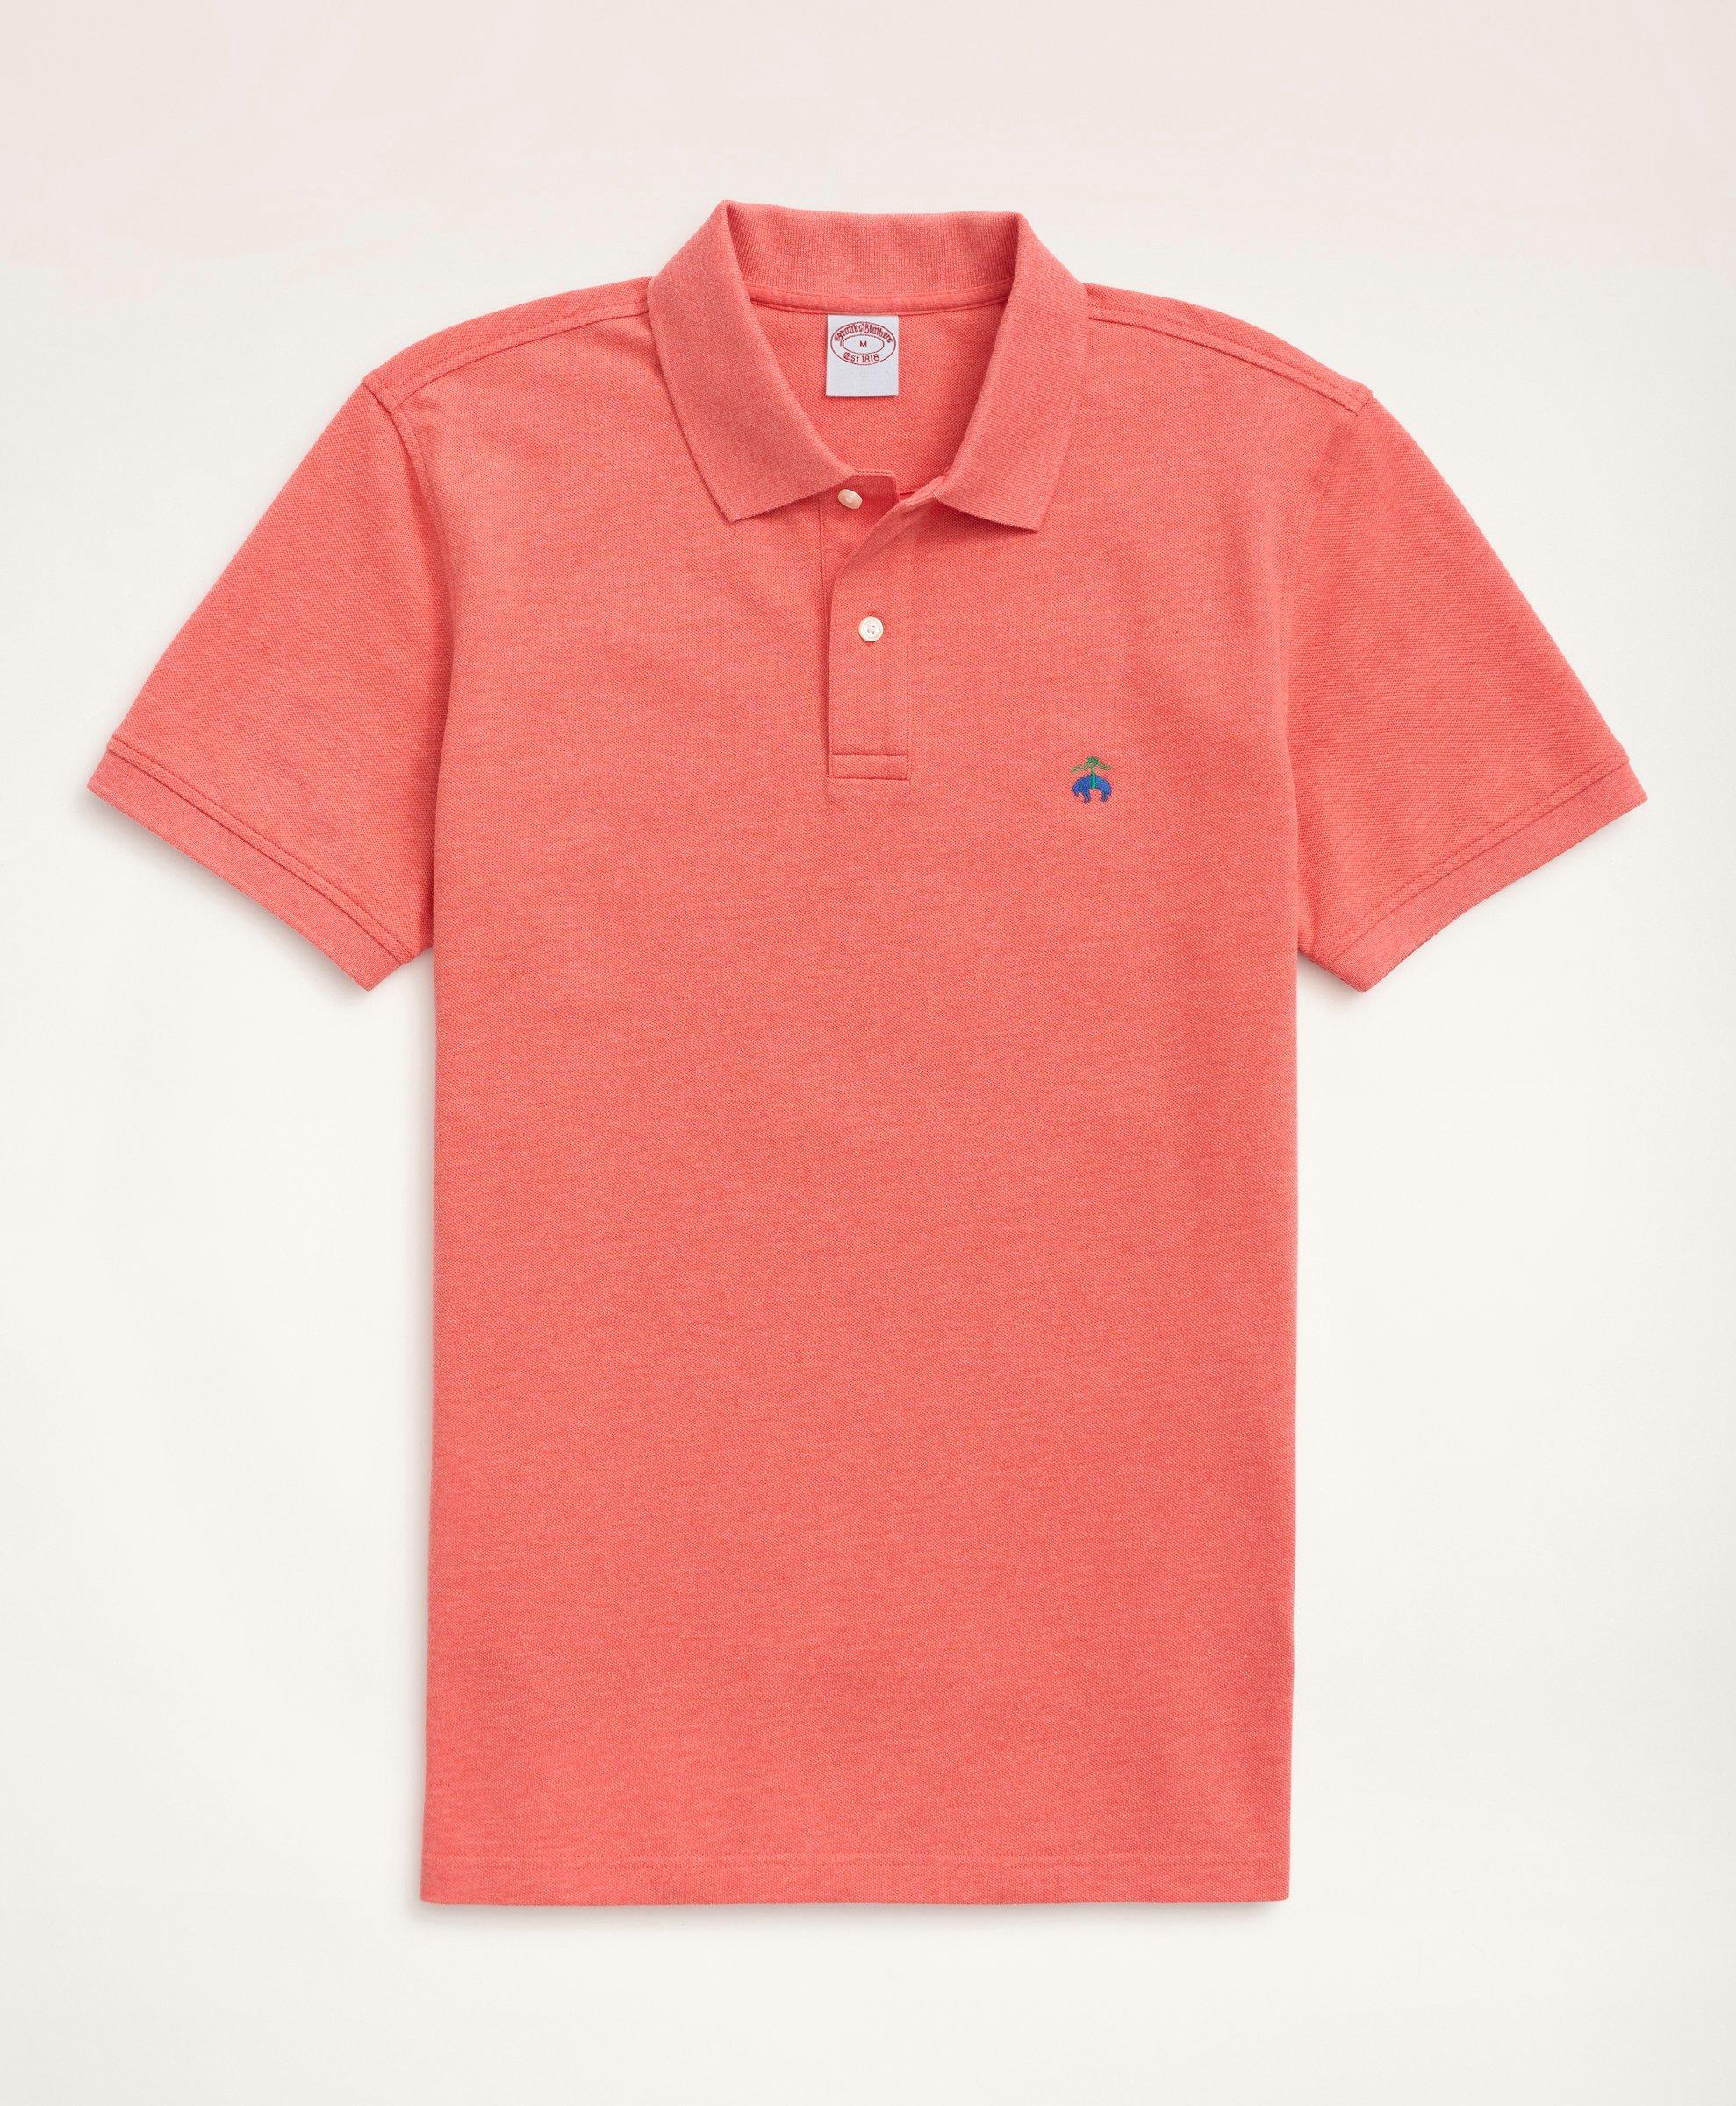 Brooks Brothers Golden Fleece Slim Fit Stretch Supima Polo Shirt | Coral | Size Large